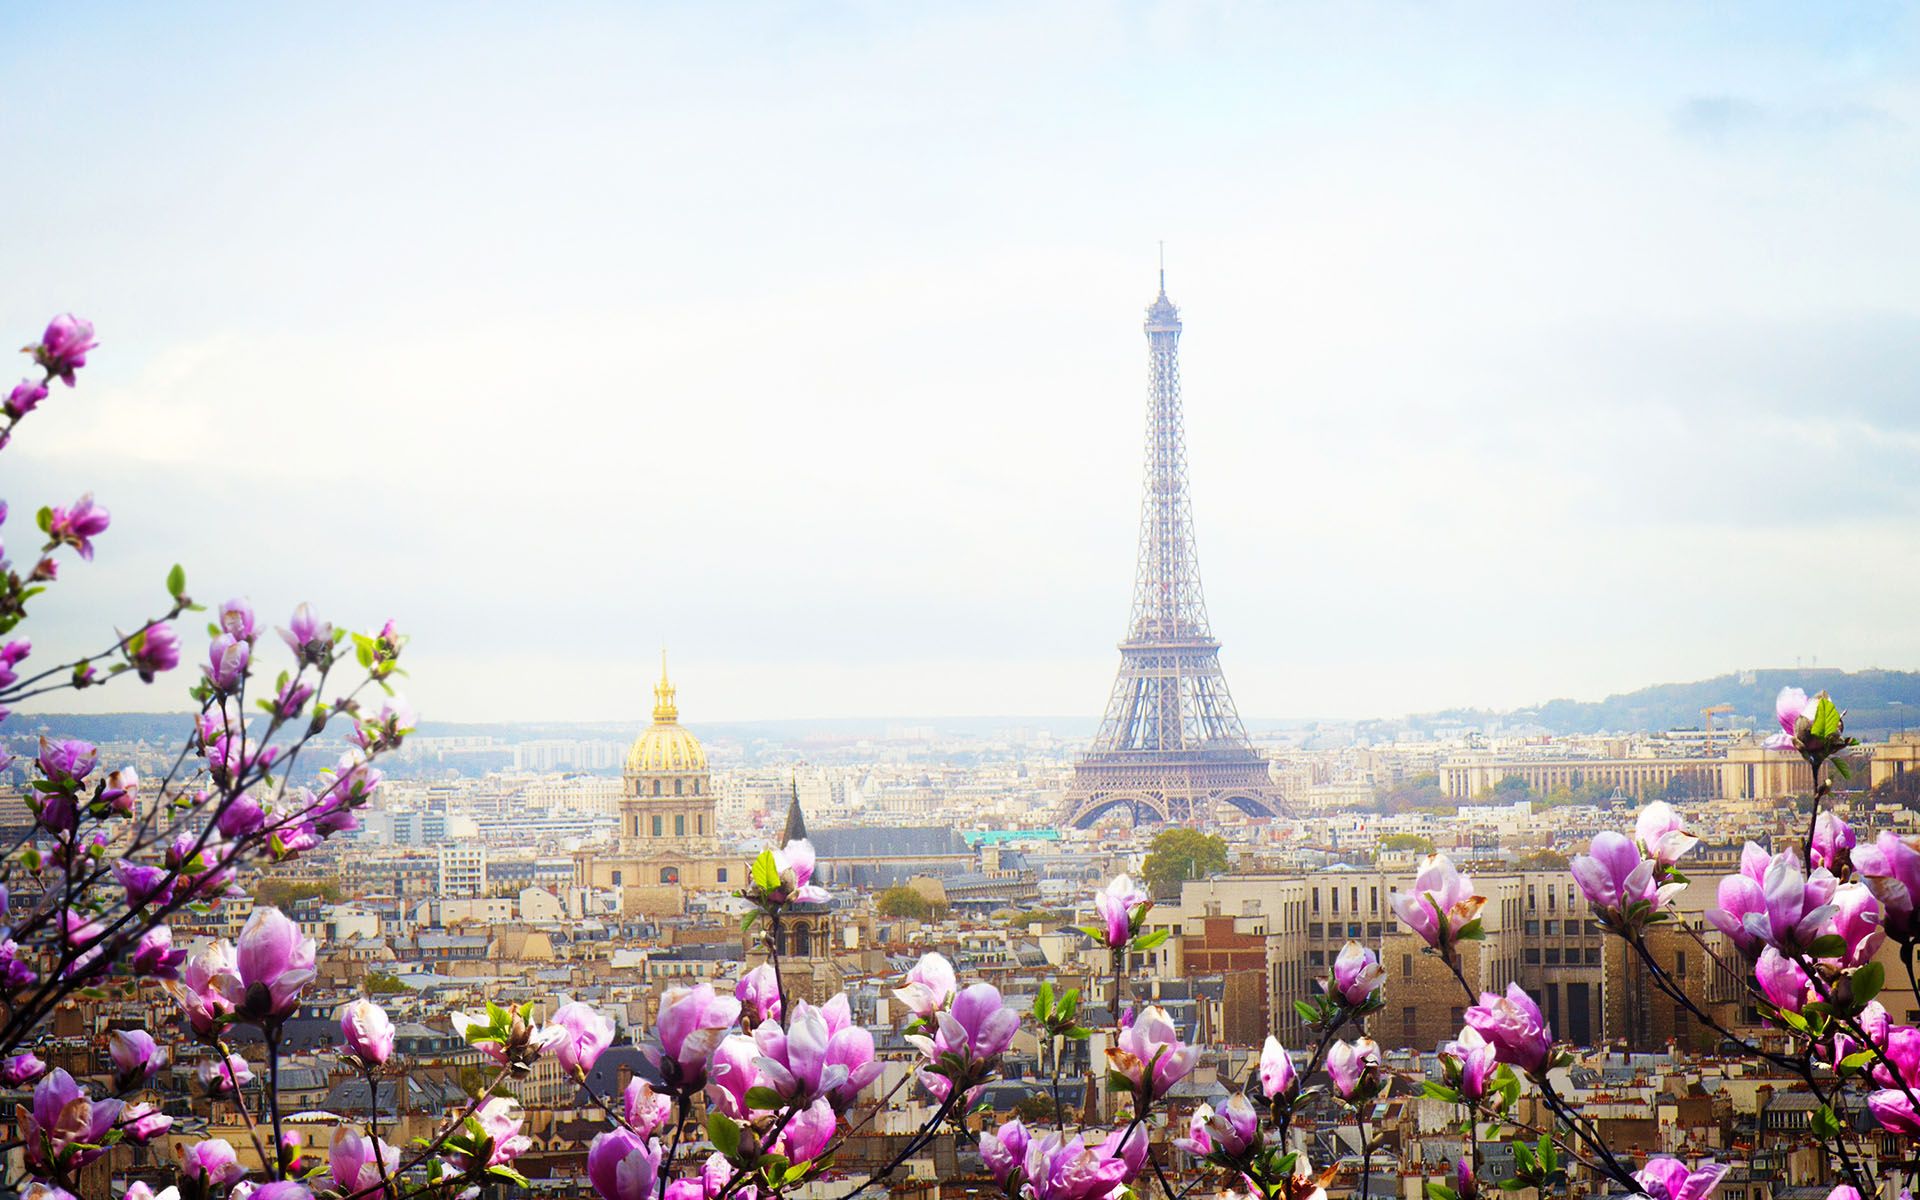 Wallpaper download the city, paris, spring, europe, france